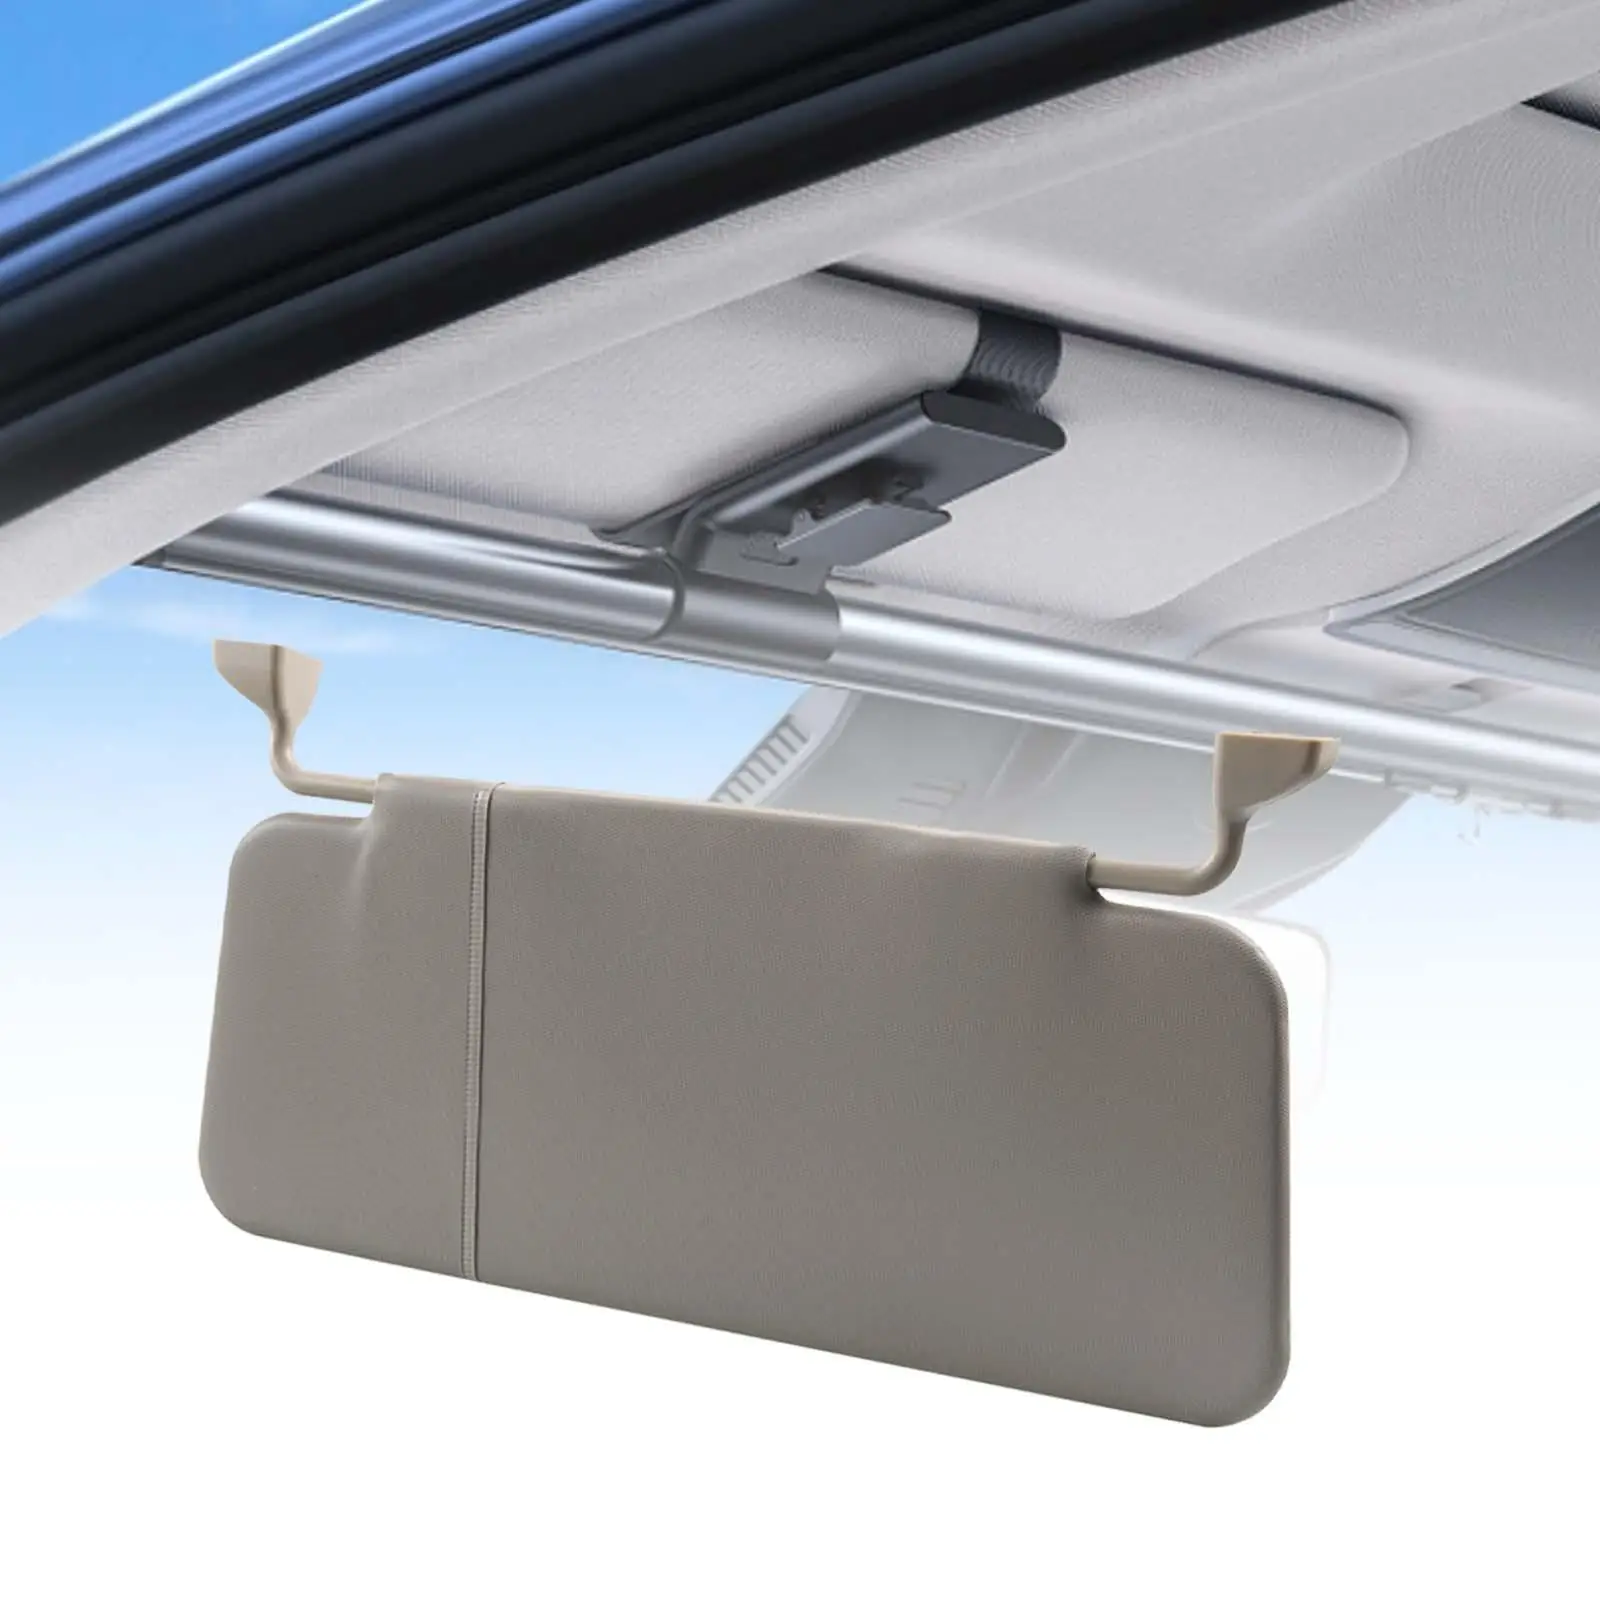 Replacement Sun Visor Shield Sunproof Plate Universal for Construction Vehicles Convenient Installation Repairing Accessory